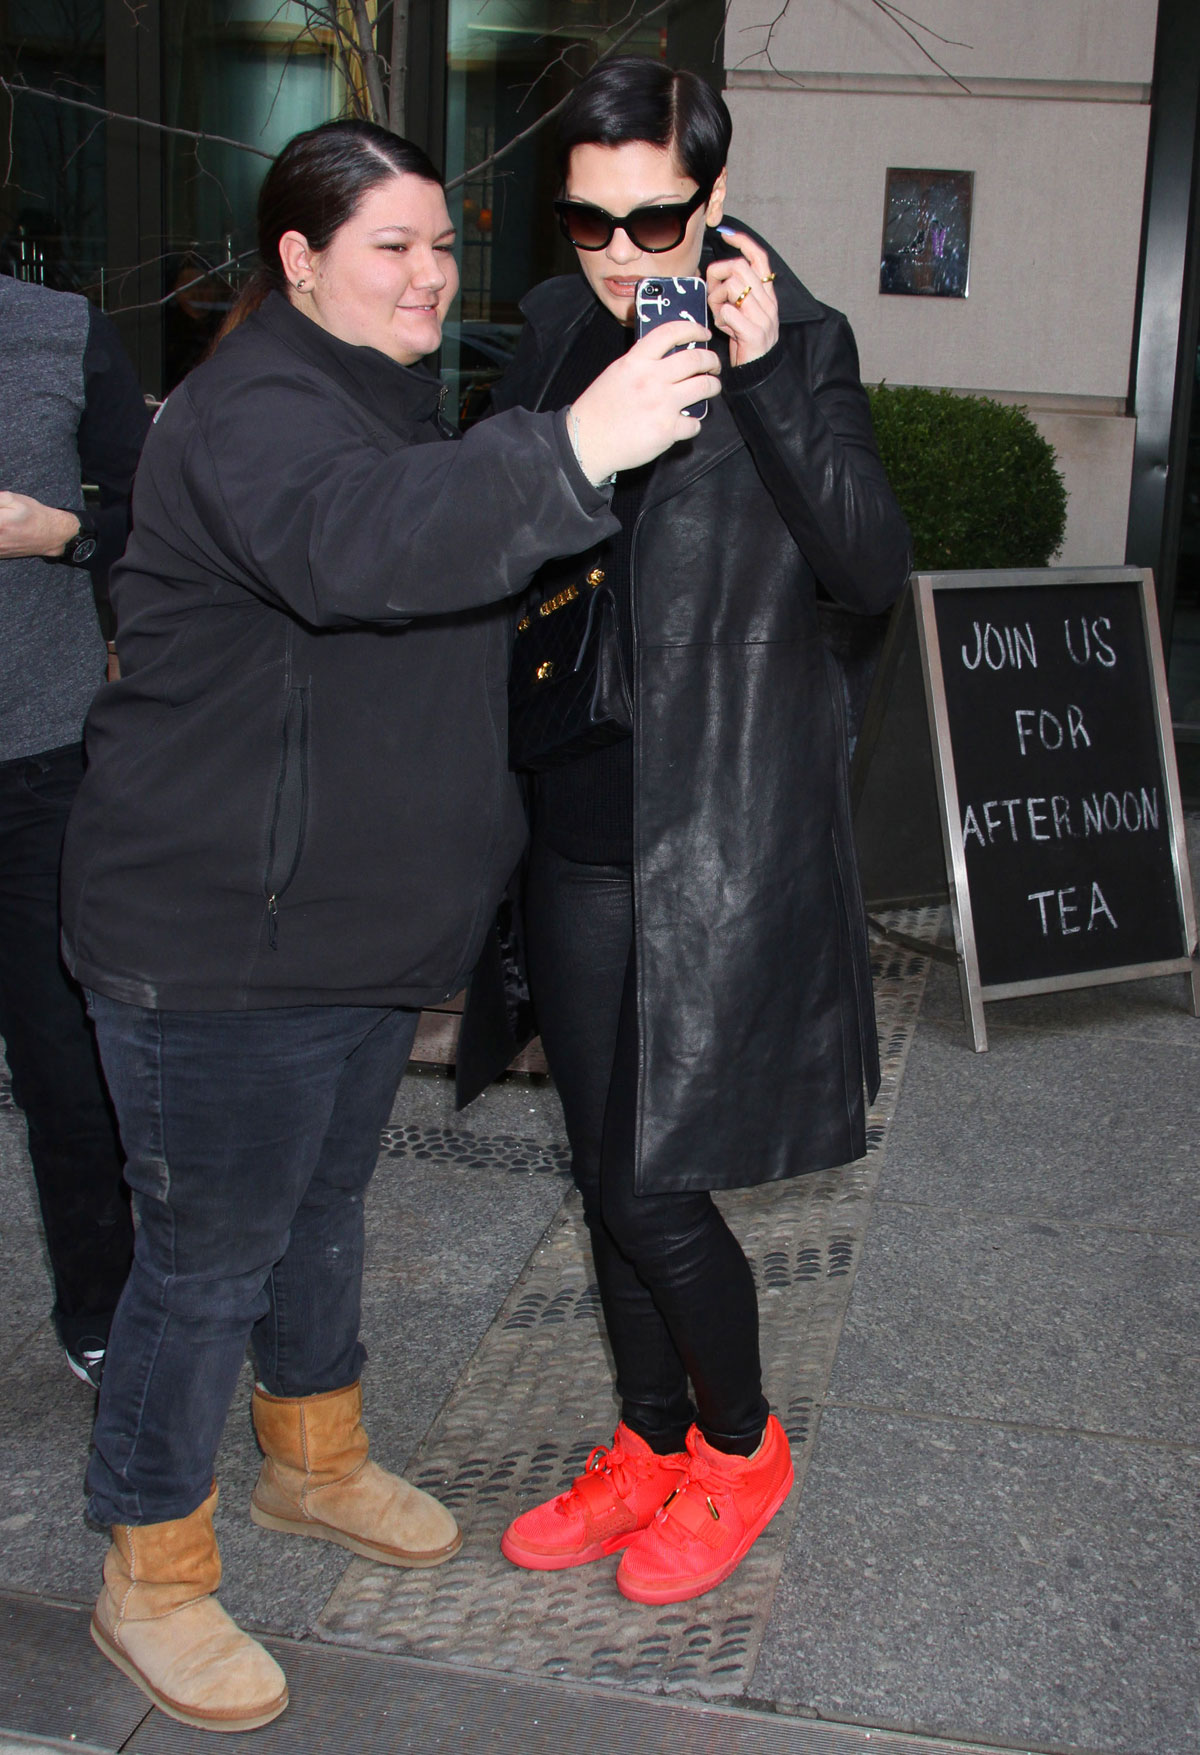 Jessie J out and about in NYC